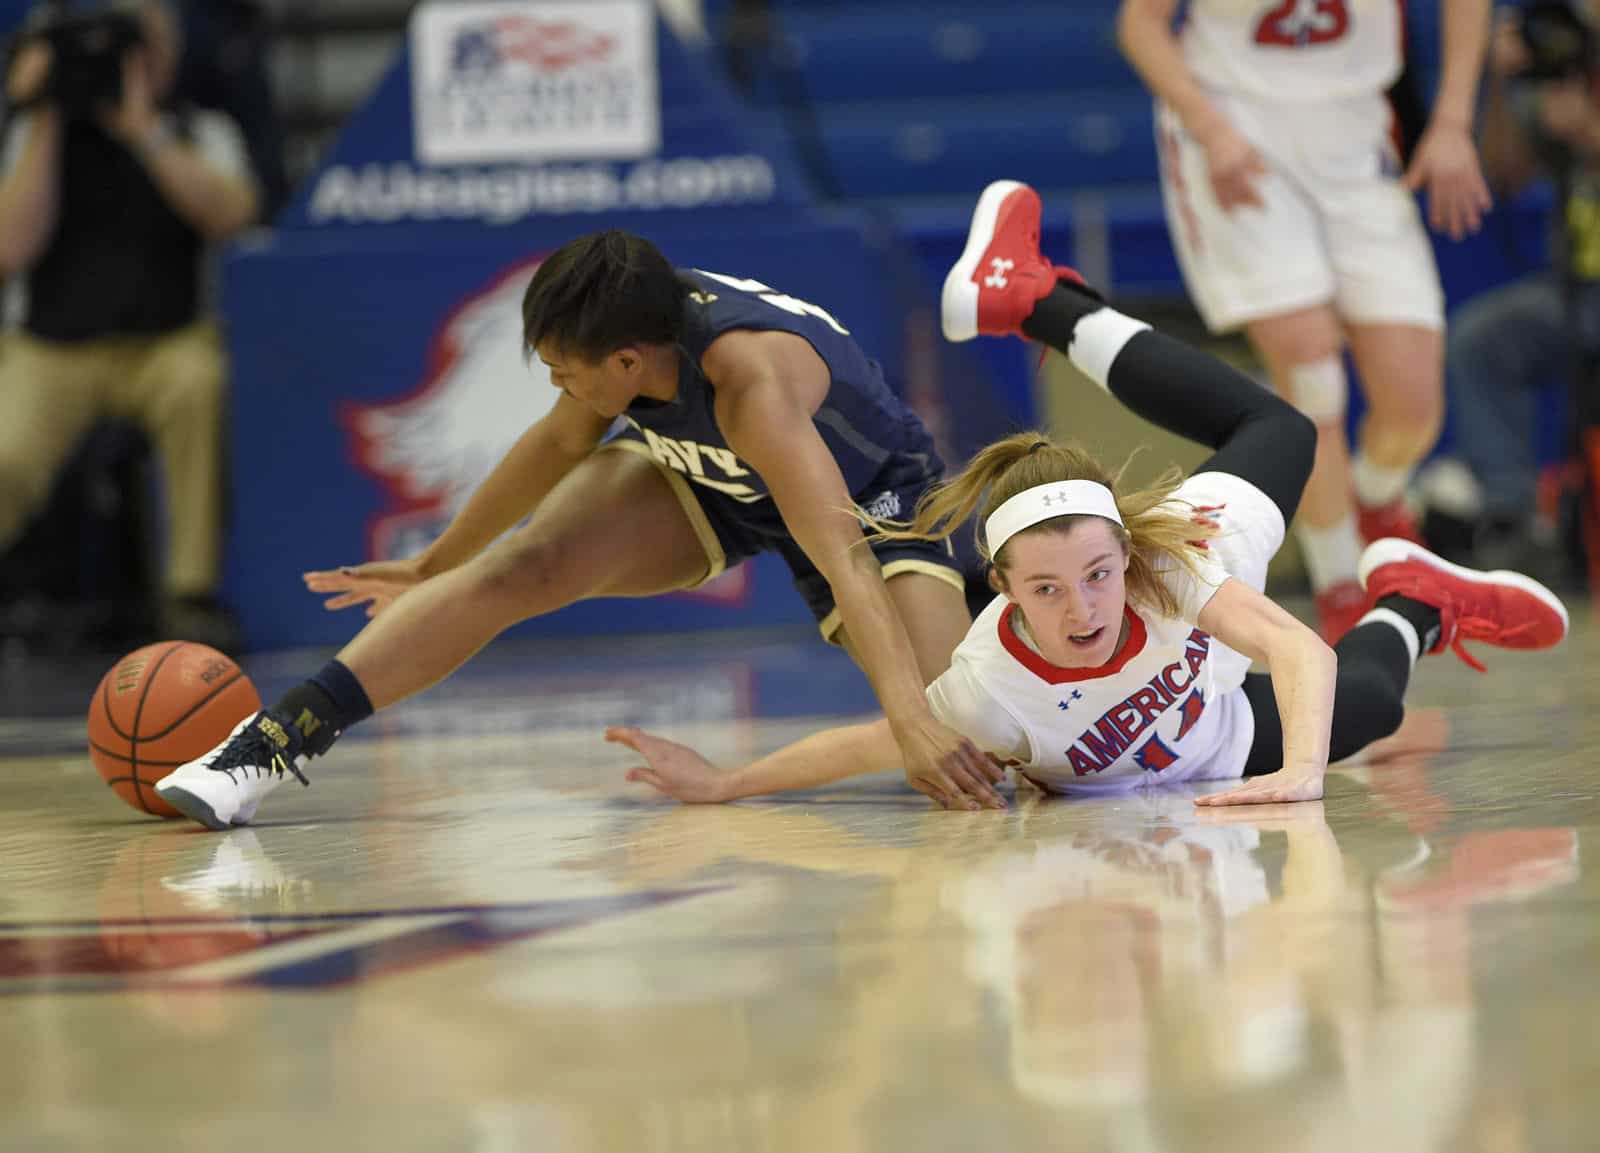 American guard Maria Liddane (14) battles for the ball against Navy guard Bianca Roach (15) during the first half an NCAA college basketball game for the Patriot League women's tournament championship, Sunday, March 11, 2018, in Washington. (AP Photo/Nick Wass)